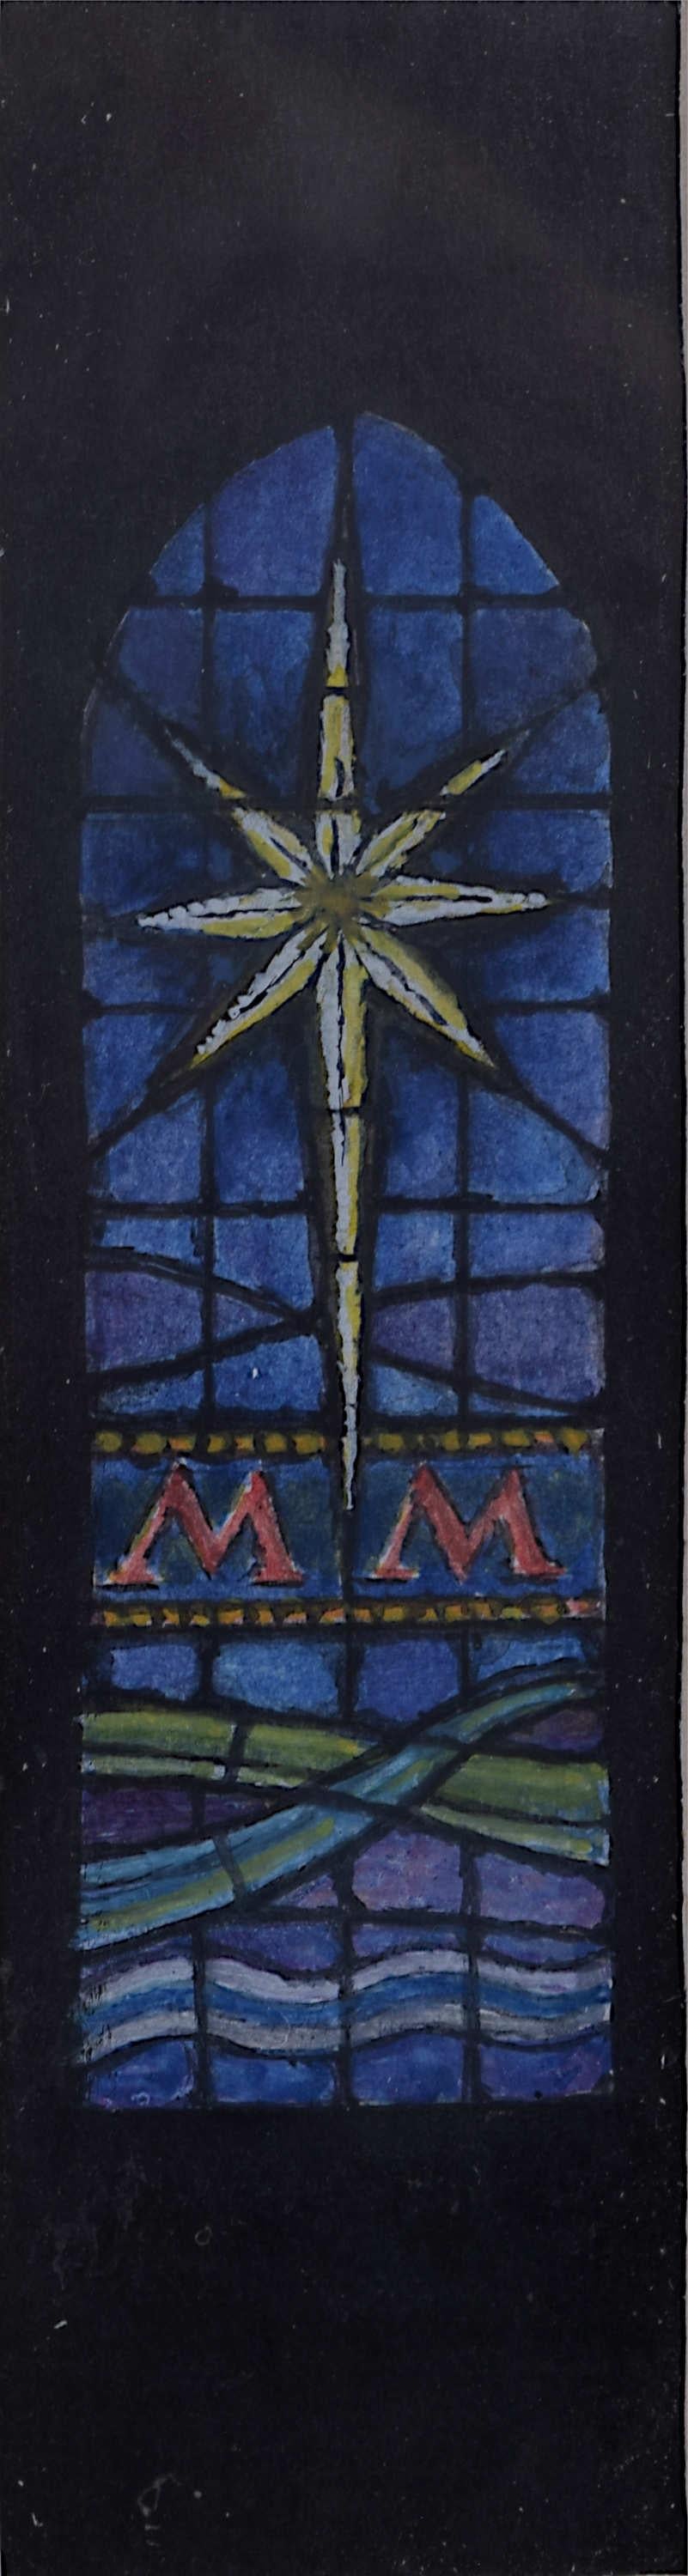 We acquired a series of watercolour stained glass designs from Jane Gray's studio. To find more scroll down to "More from this Seller" and below it click on "See all from this seller." 

Jane Gray (b.1931)
Stained Glass Design
Watercolour
12.5 x 3.5